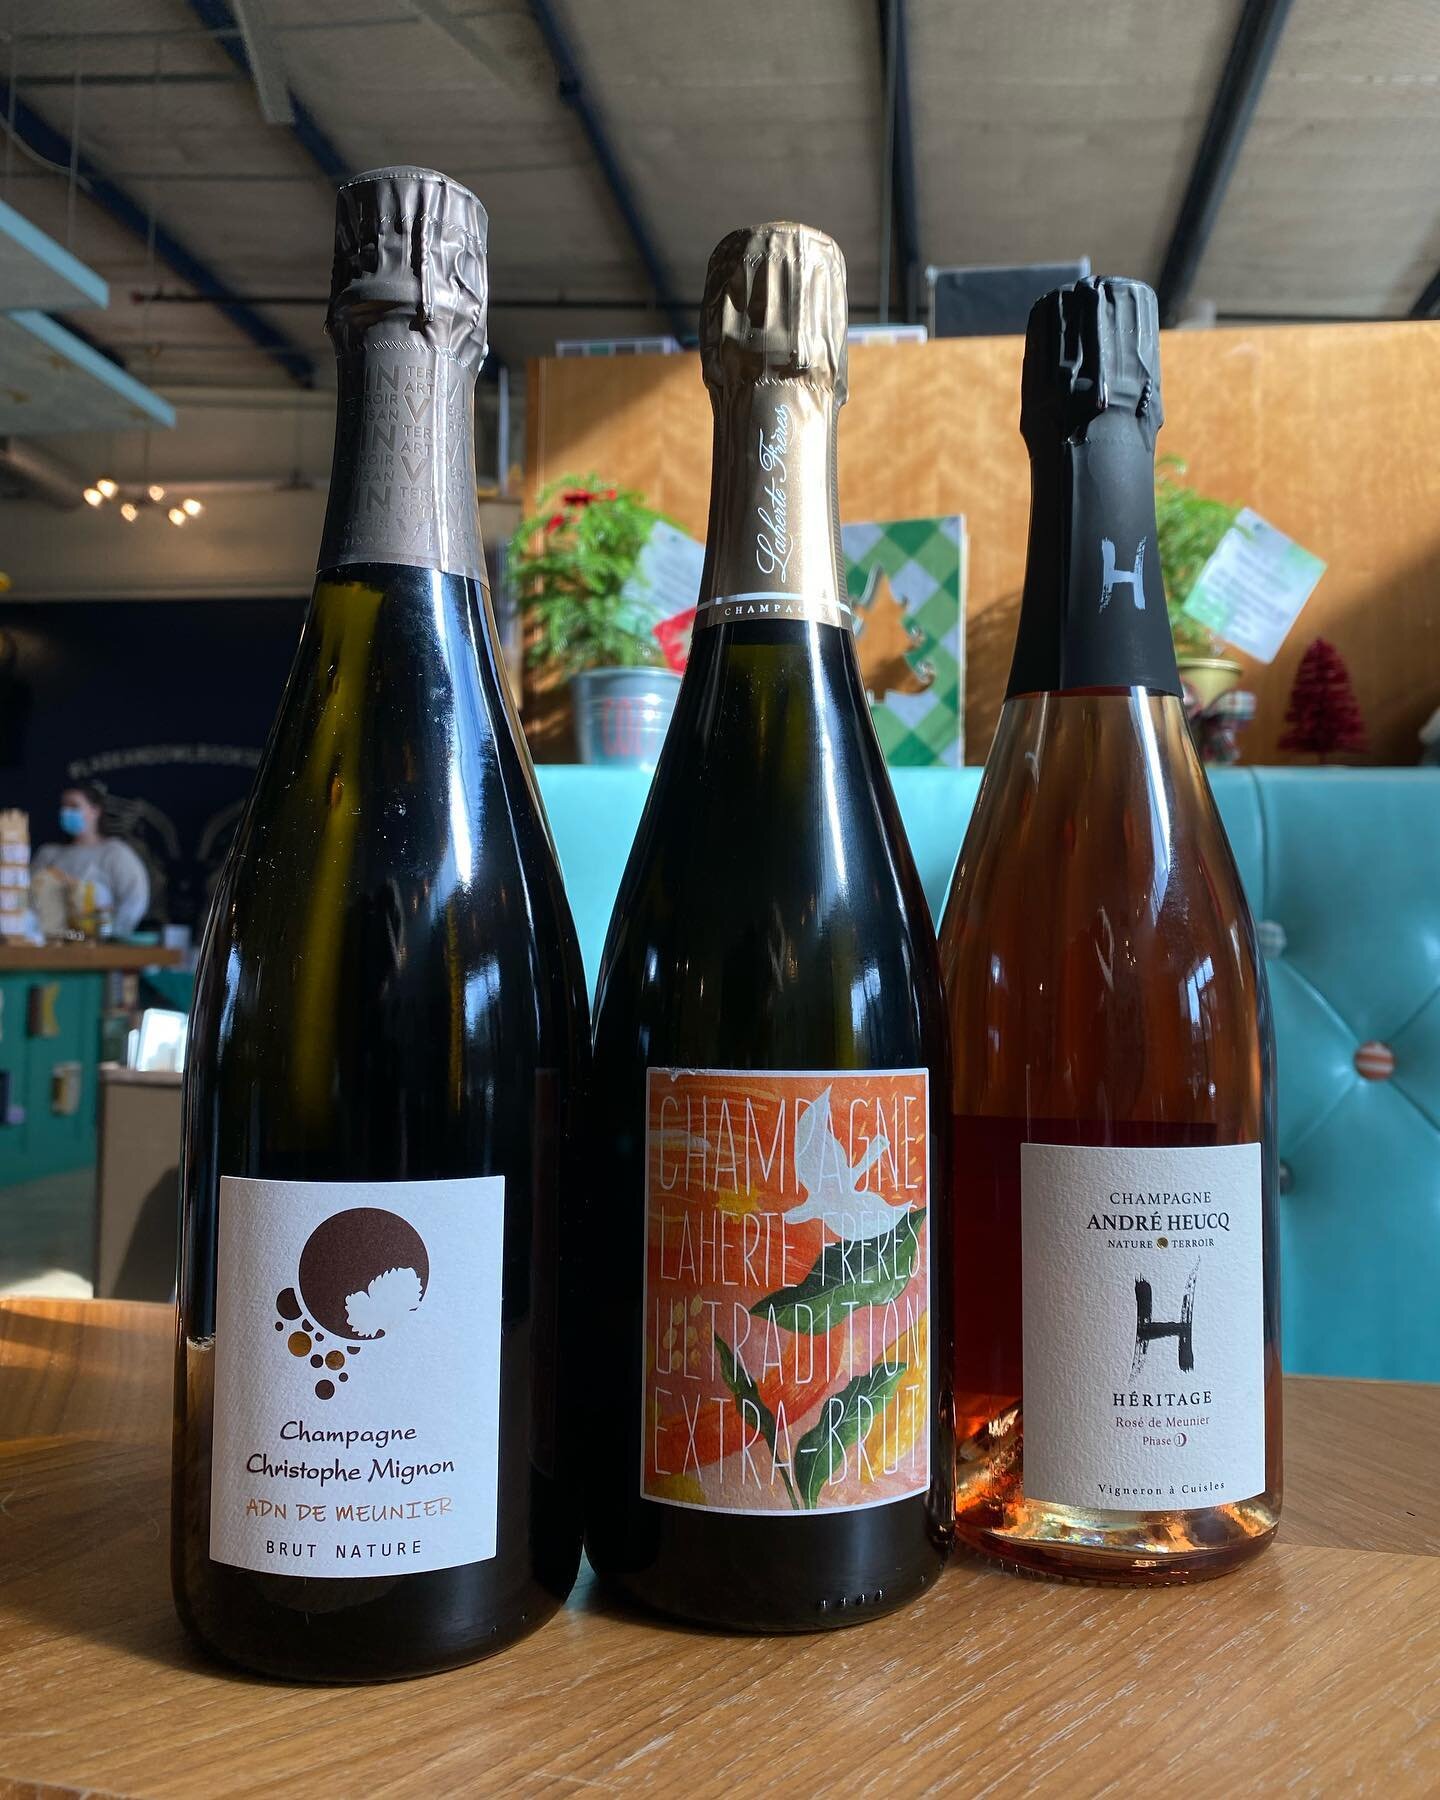 🚨TEN DAYS TIL CHRISTMAS🚨 

feeling festive? need a last minute gift? grab a glass &amp; shop the store - we&rsquo;ll pick the perfect bottle (or three! or four!) for any wine lover on your list. 

Not sure what they want? We&rsquo;ve got gift cards